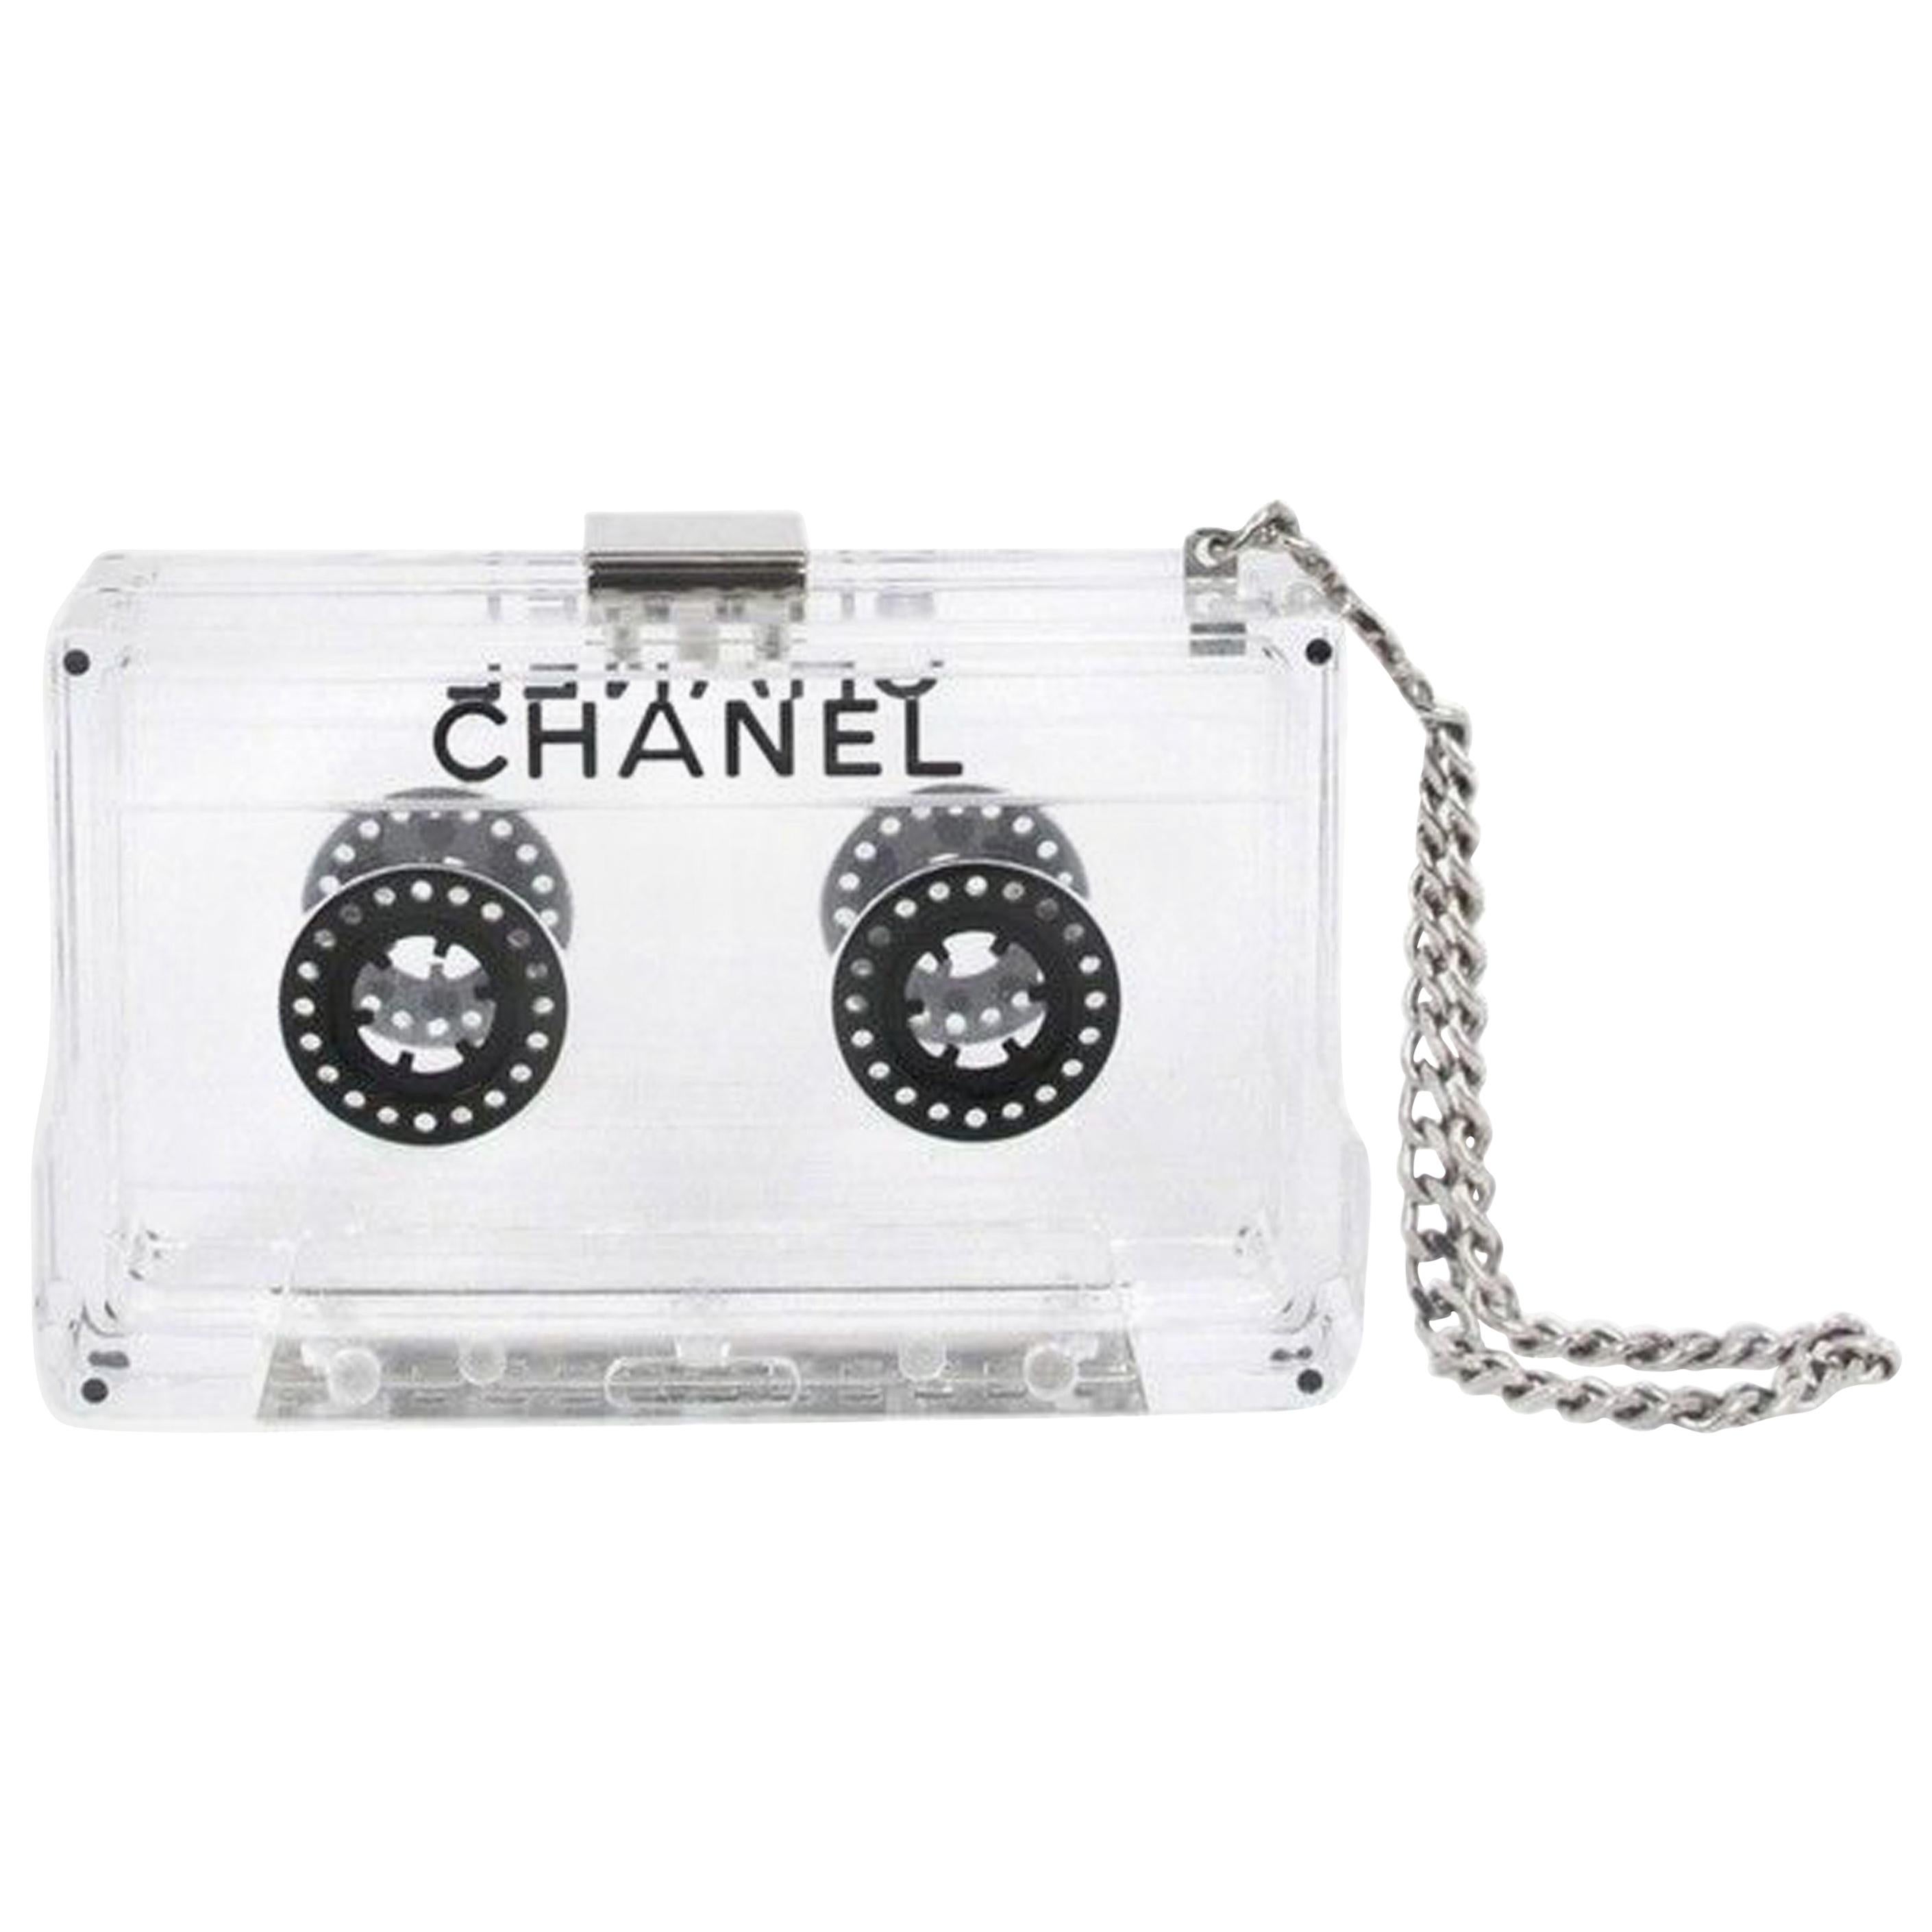 Chanel Clear Cassette Tape Lucite Clutch